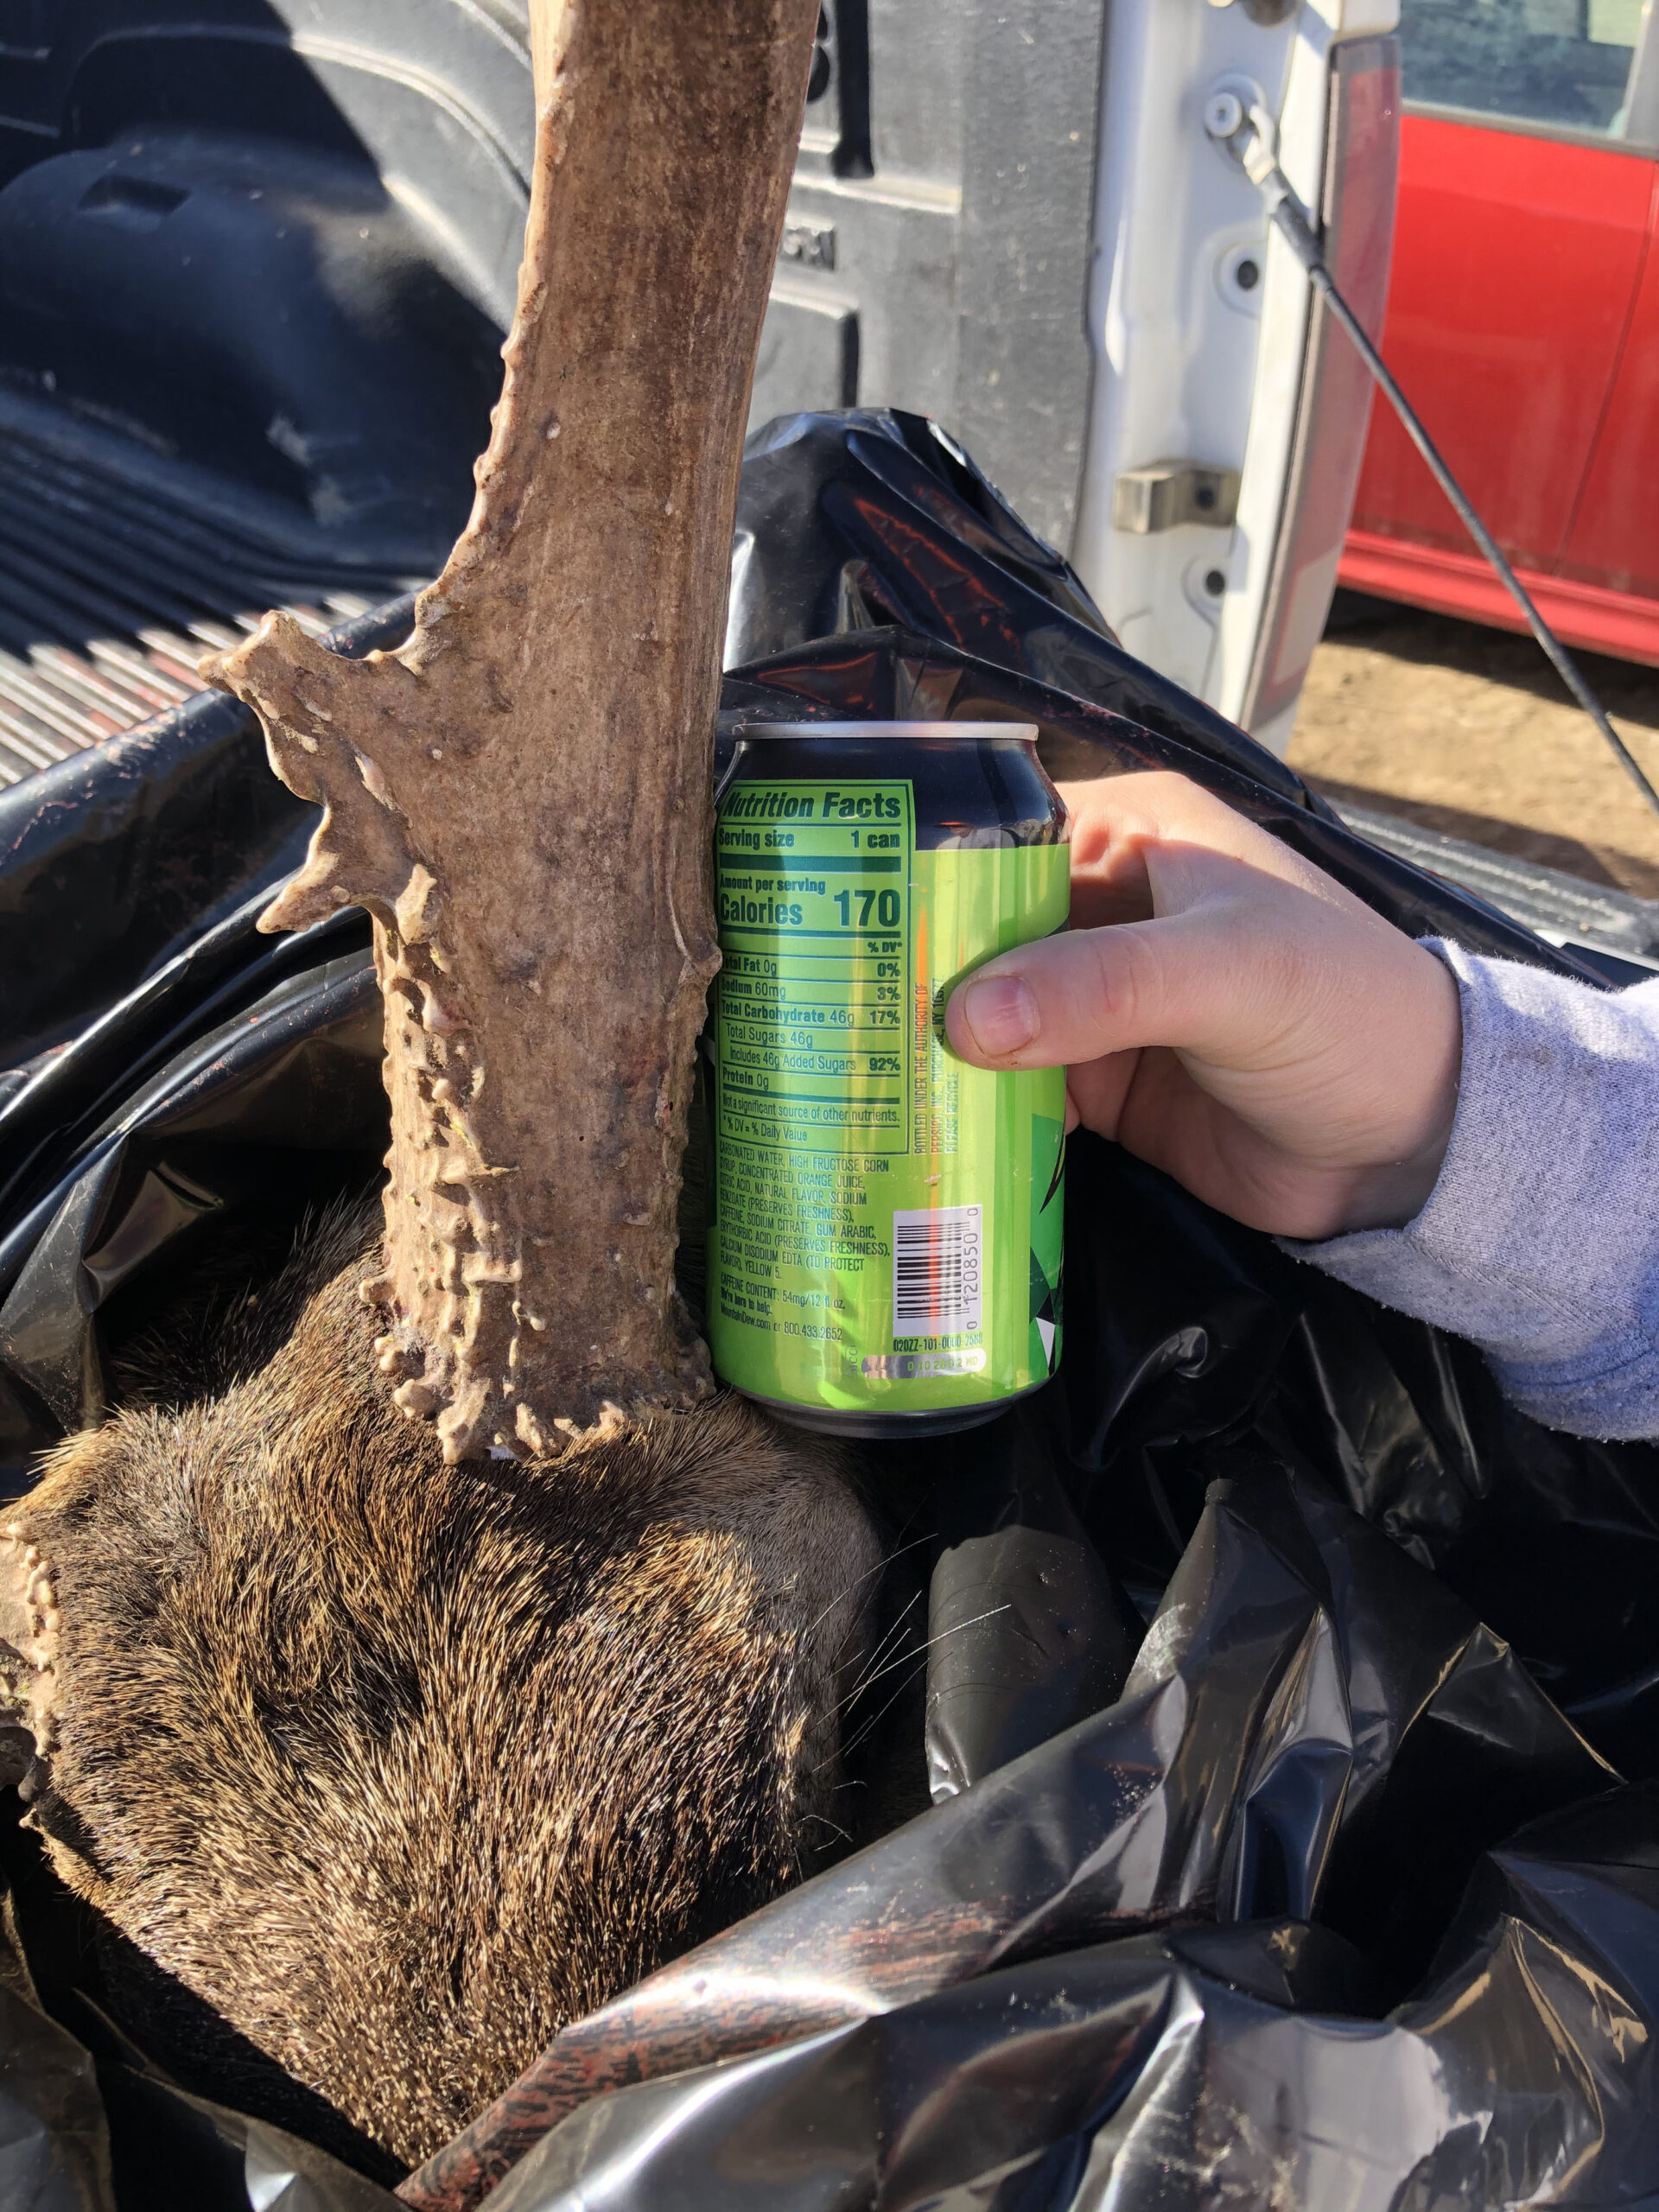 The bases of Alyssa's buck were as thick as a soda can.